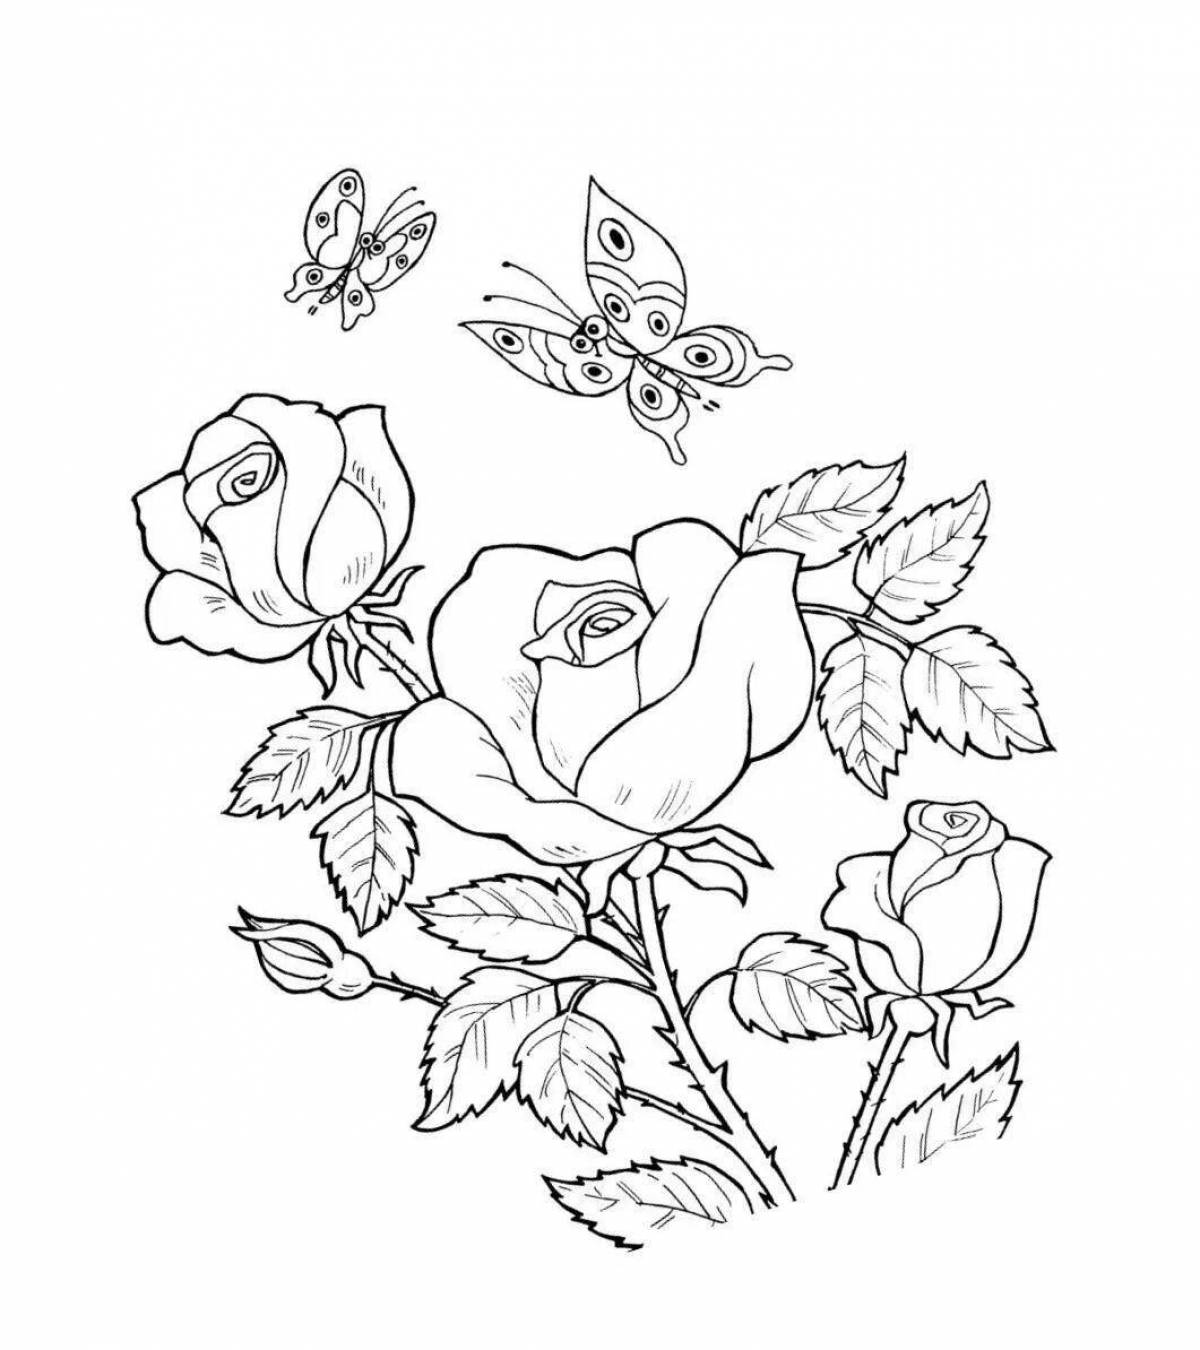 Playful rose coloring by numbers